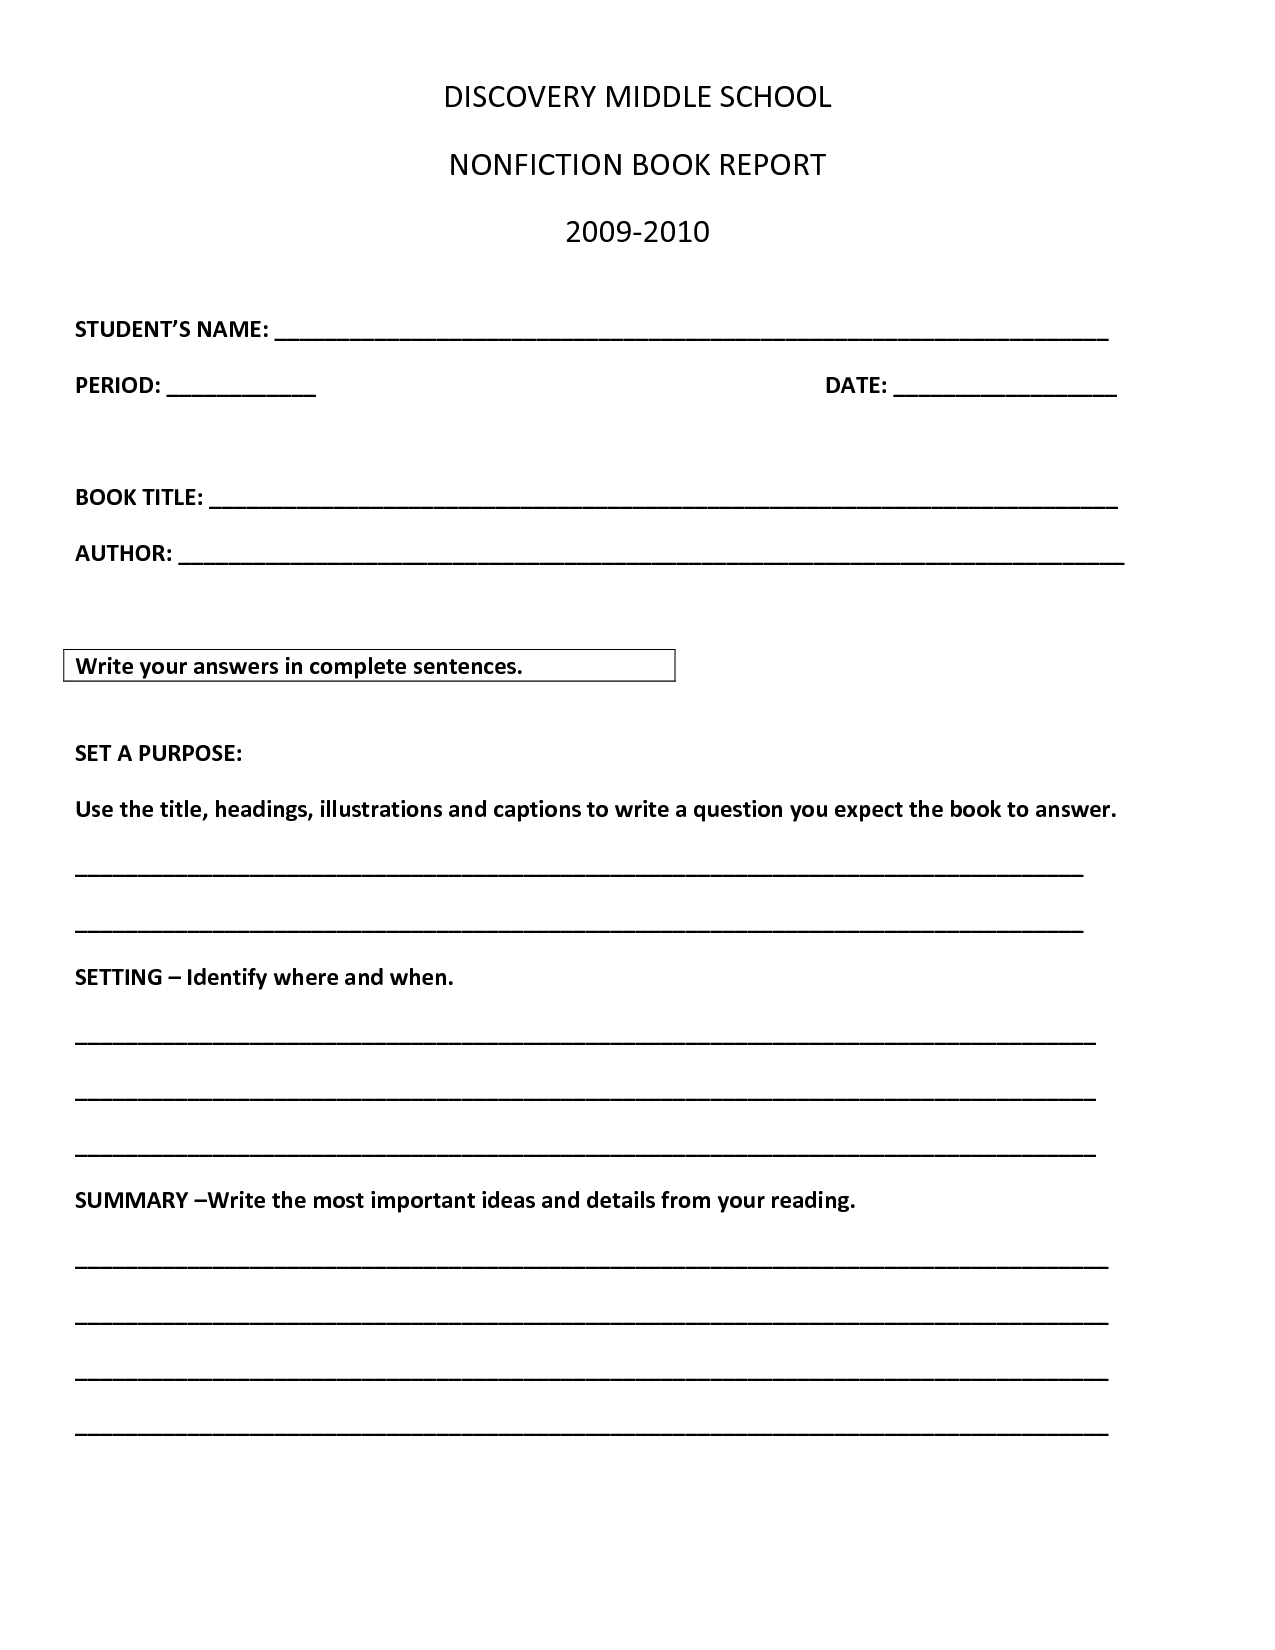 Book Report Template | Discovery Middle School Nonfiction Intended For Book Report Template Middle School